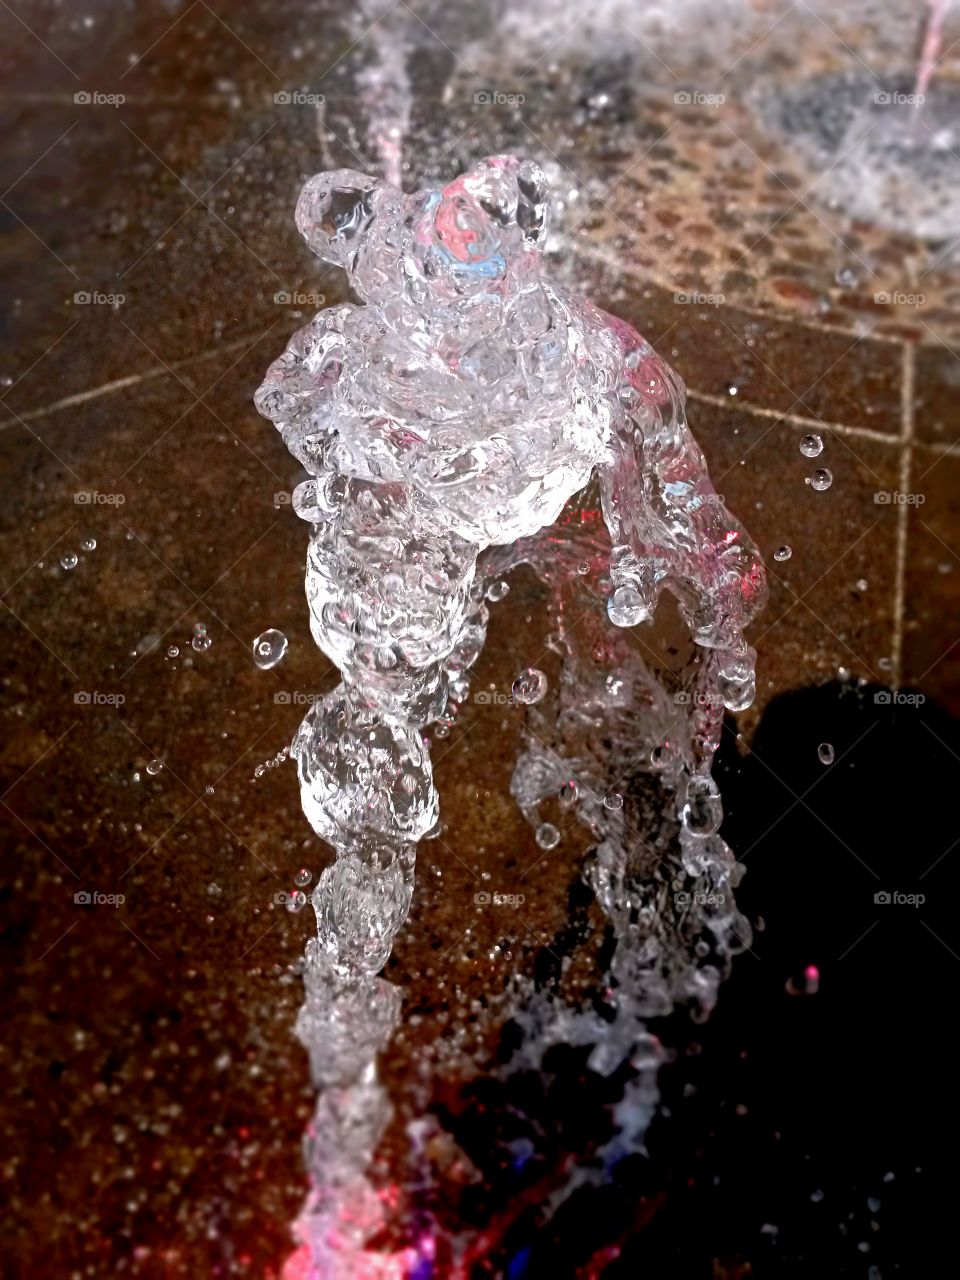 water in motion: Close up of water splash from a fountain with colored light